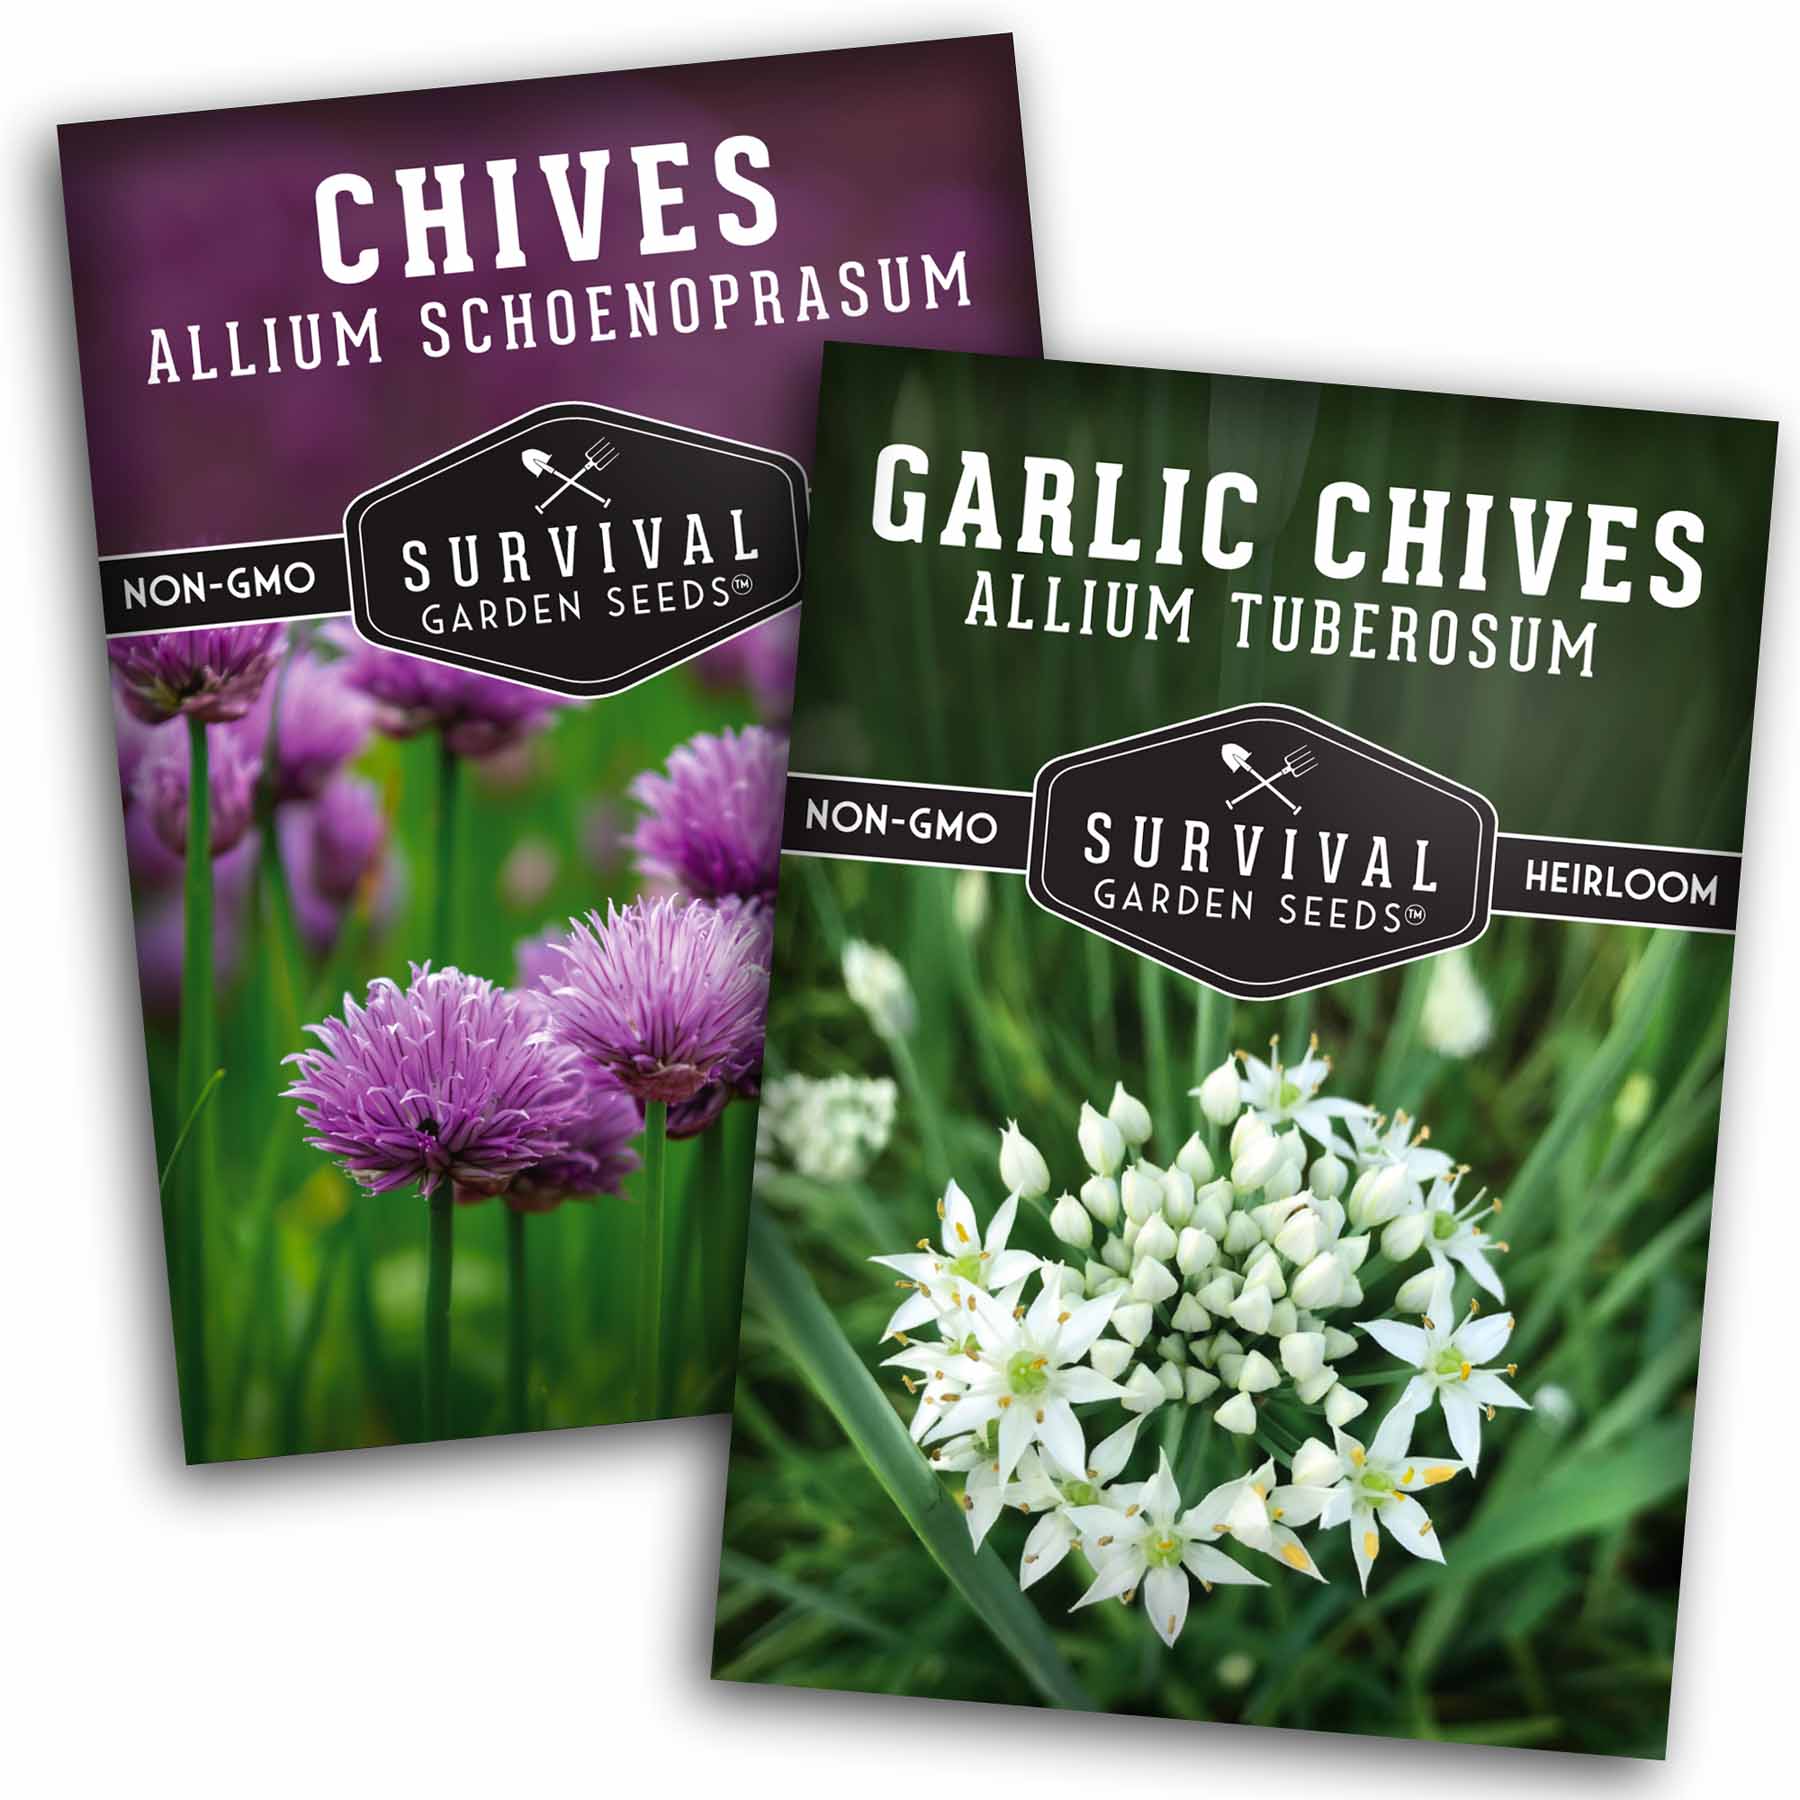 Chives collection - 2 allium seed packets